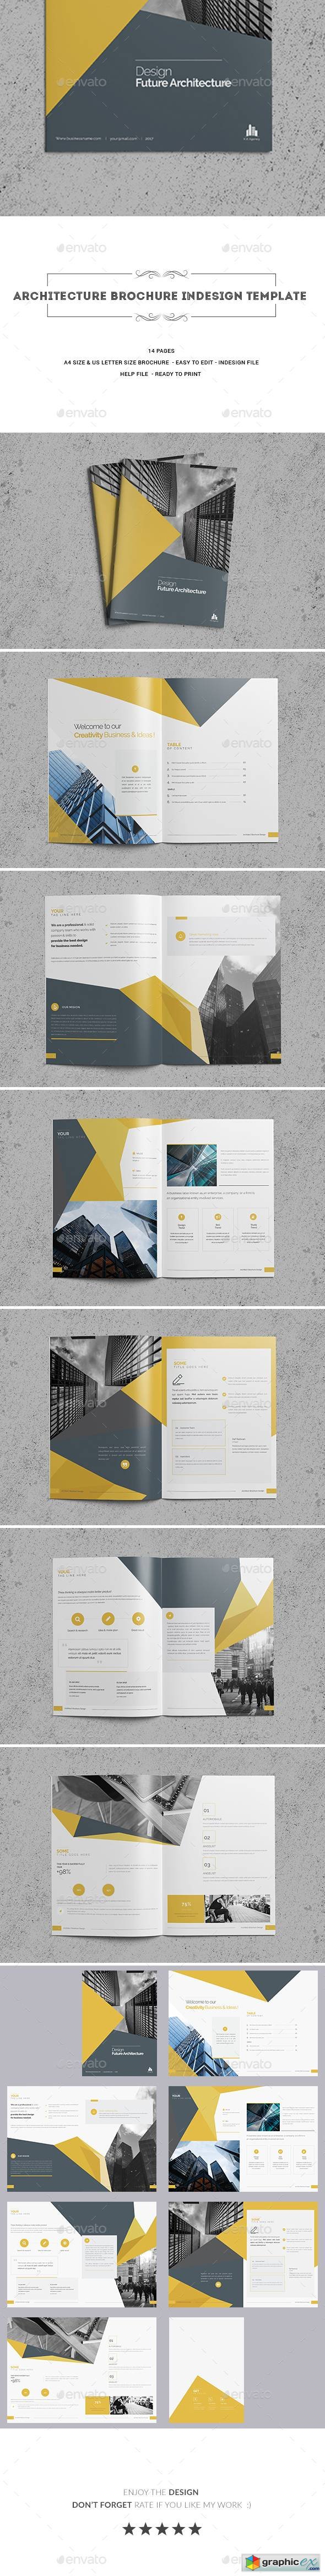 Architecture Brochure Indesign Template